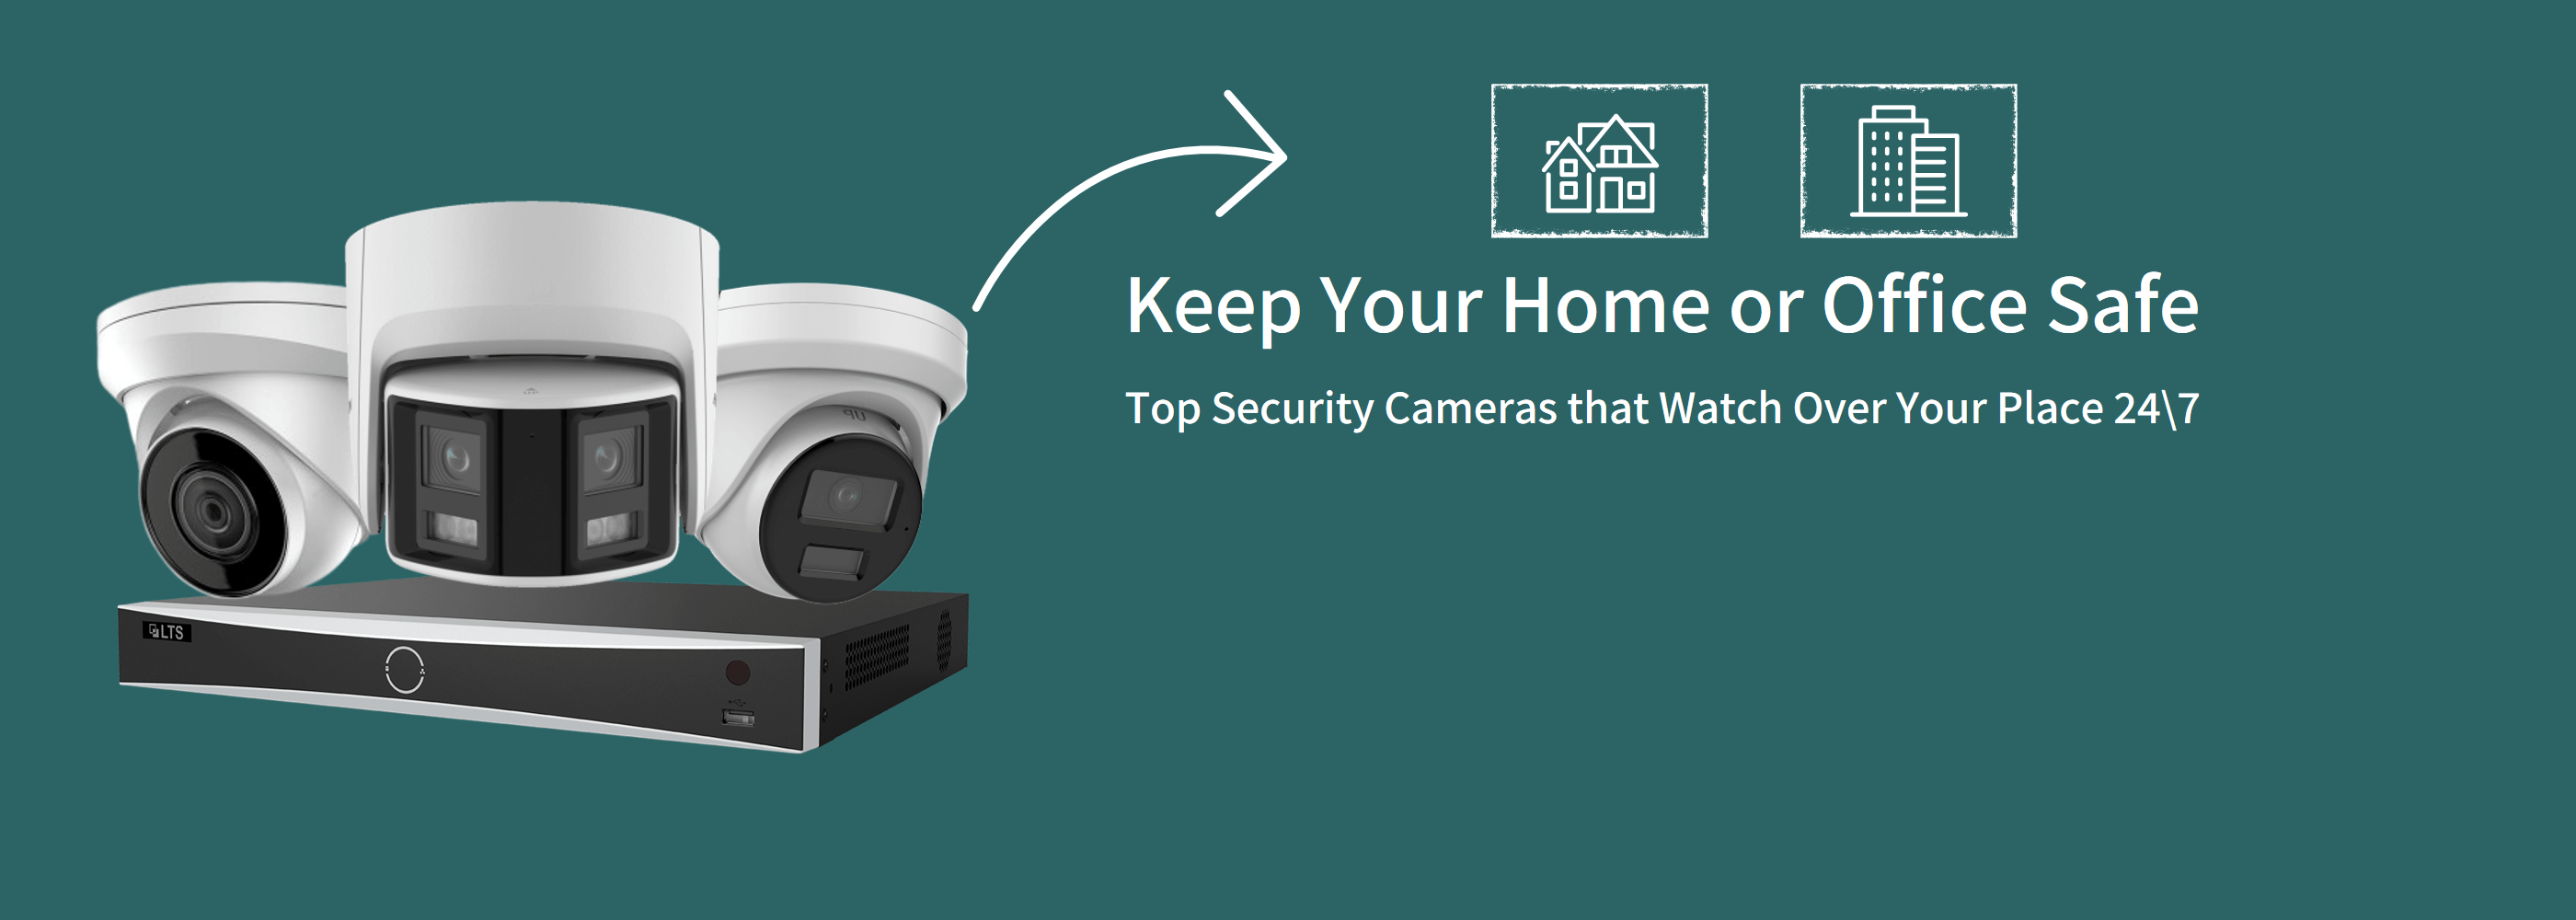 Desktop Design of 3 Security Cameras Banner Slider Image with an NVR and text that says Keep your Home or Office Safe - Top Security Cameras That Watch Over Your Place 24/7